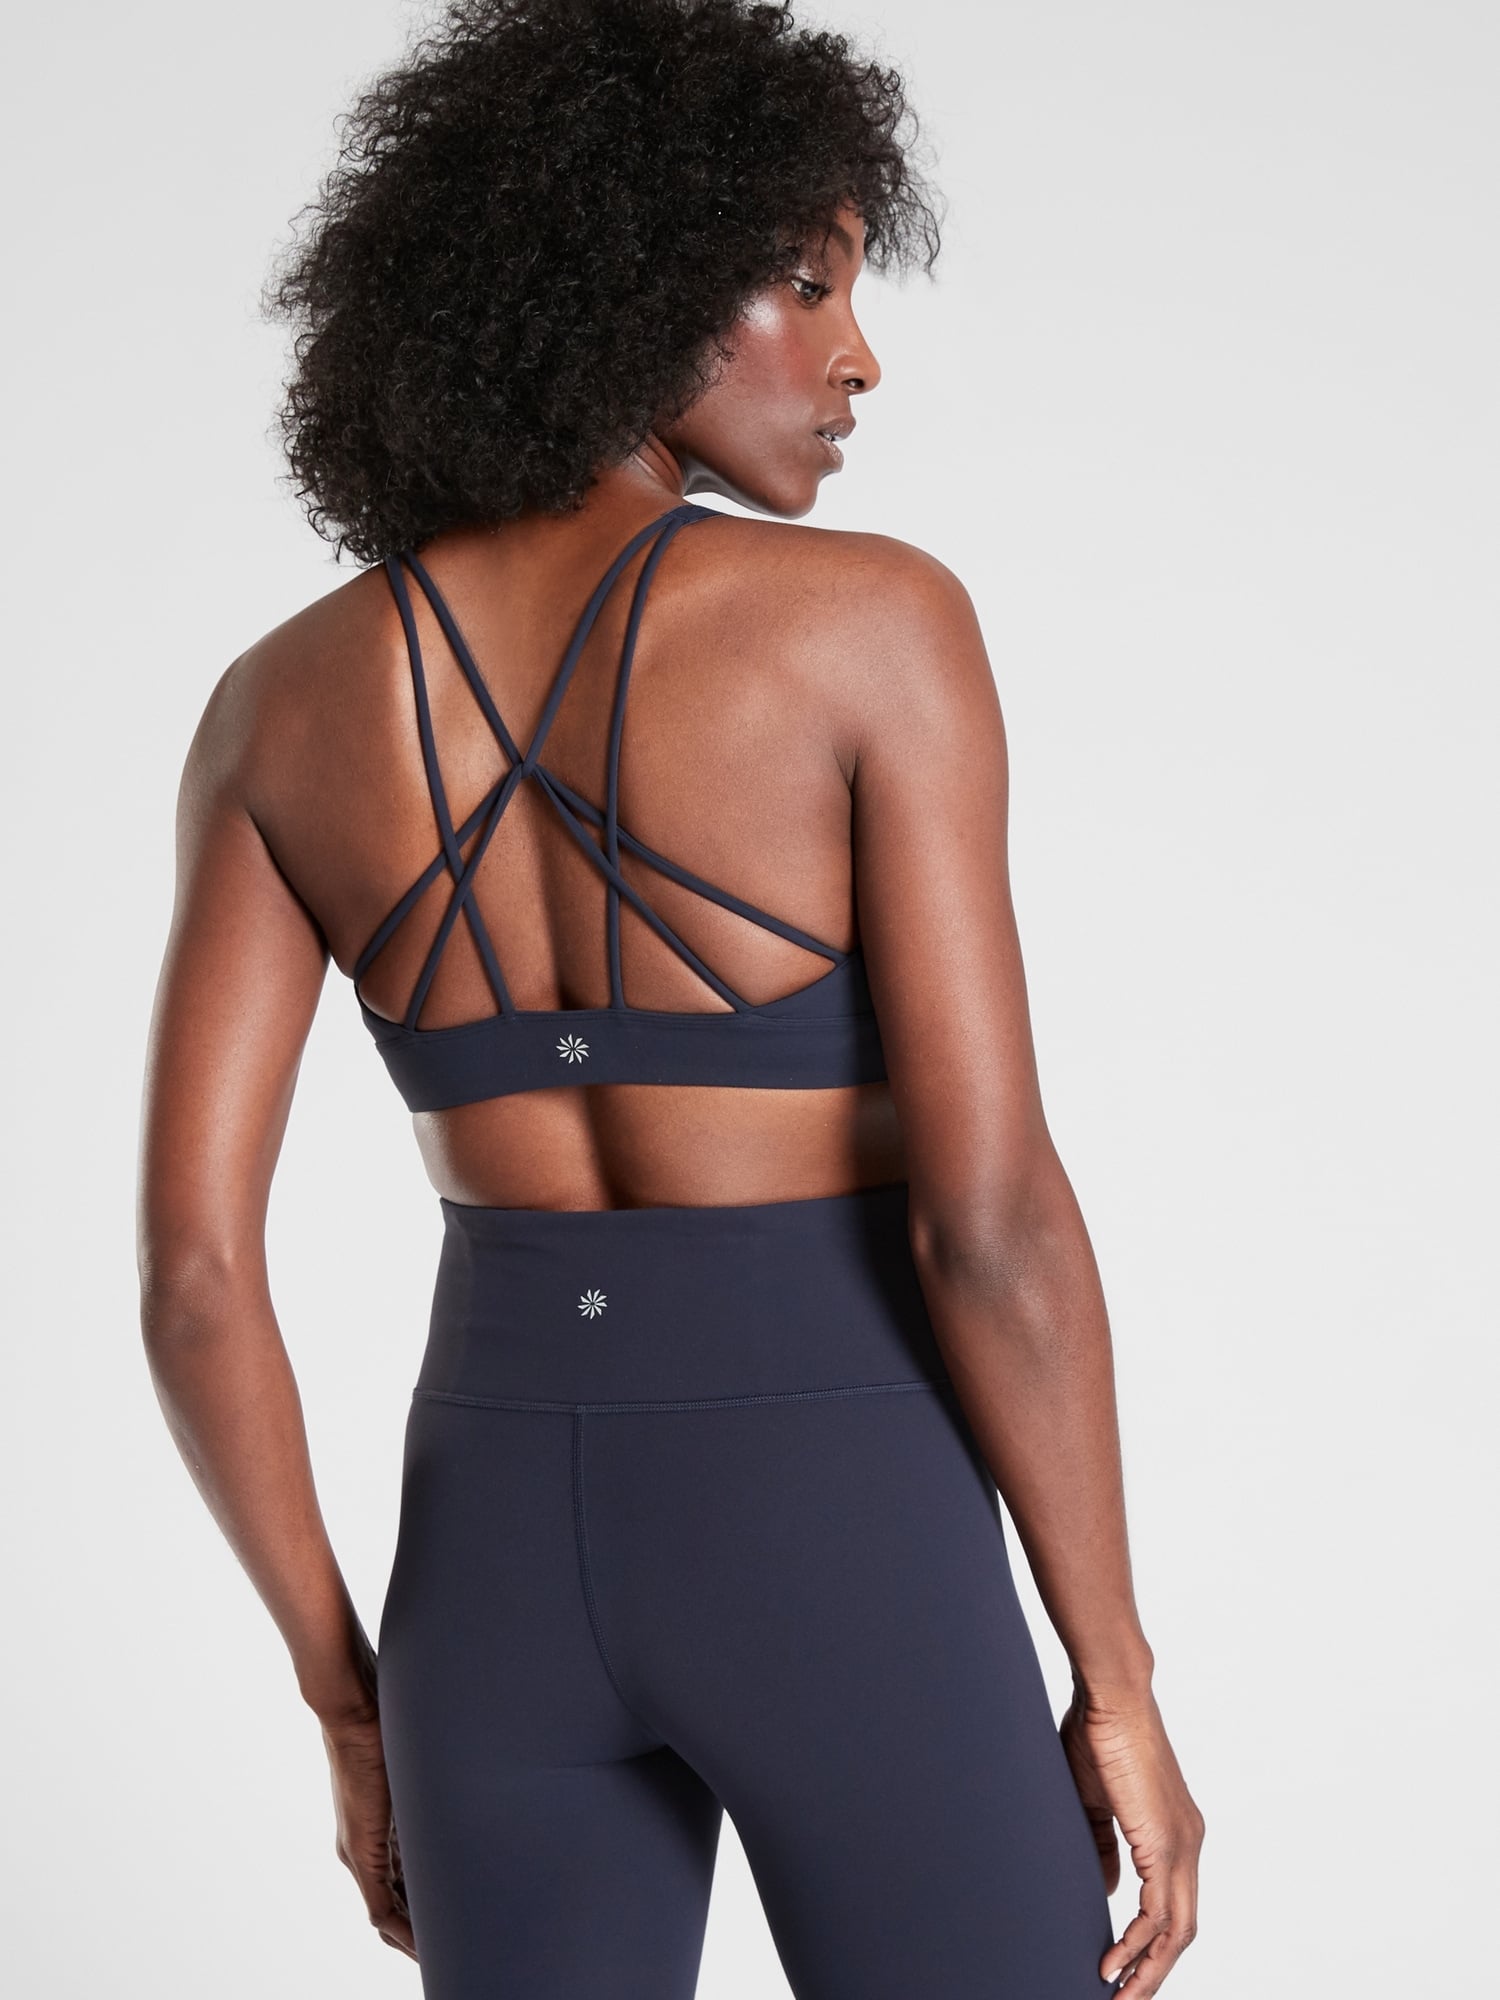 Athleta Solace Bra  Here's Your Cheat Sheet to the Best Sports